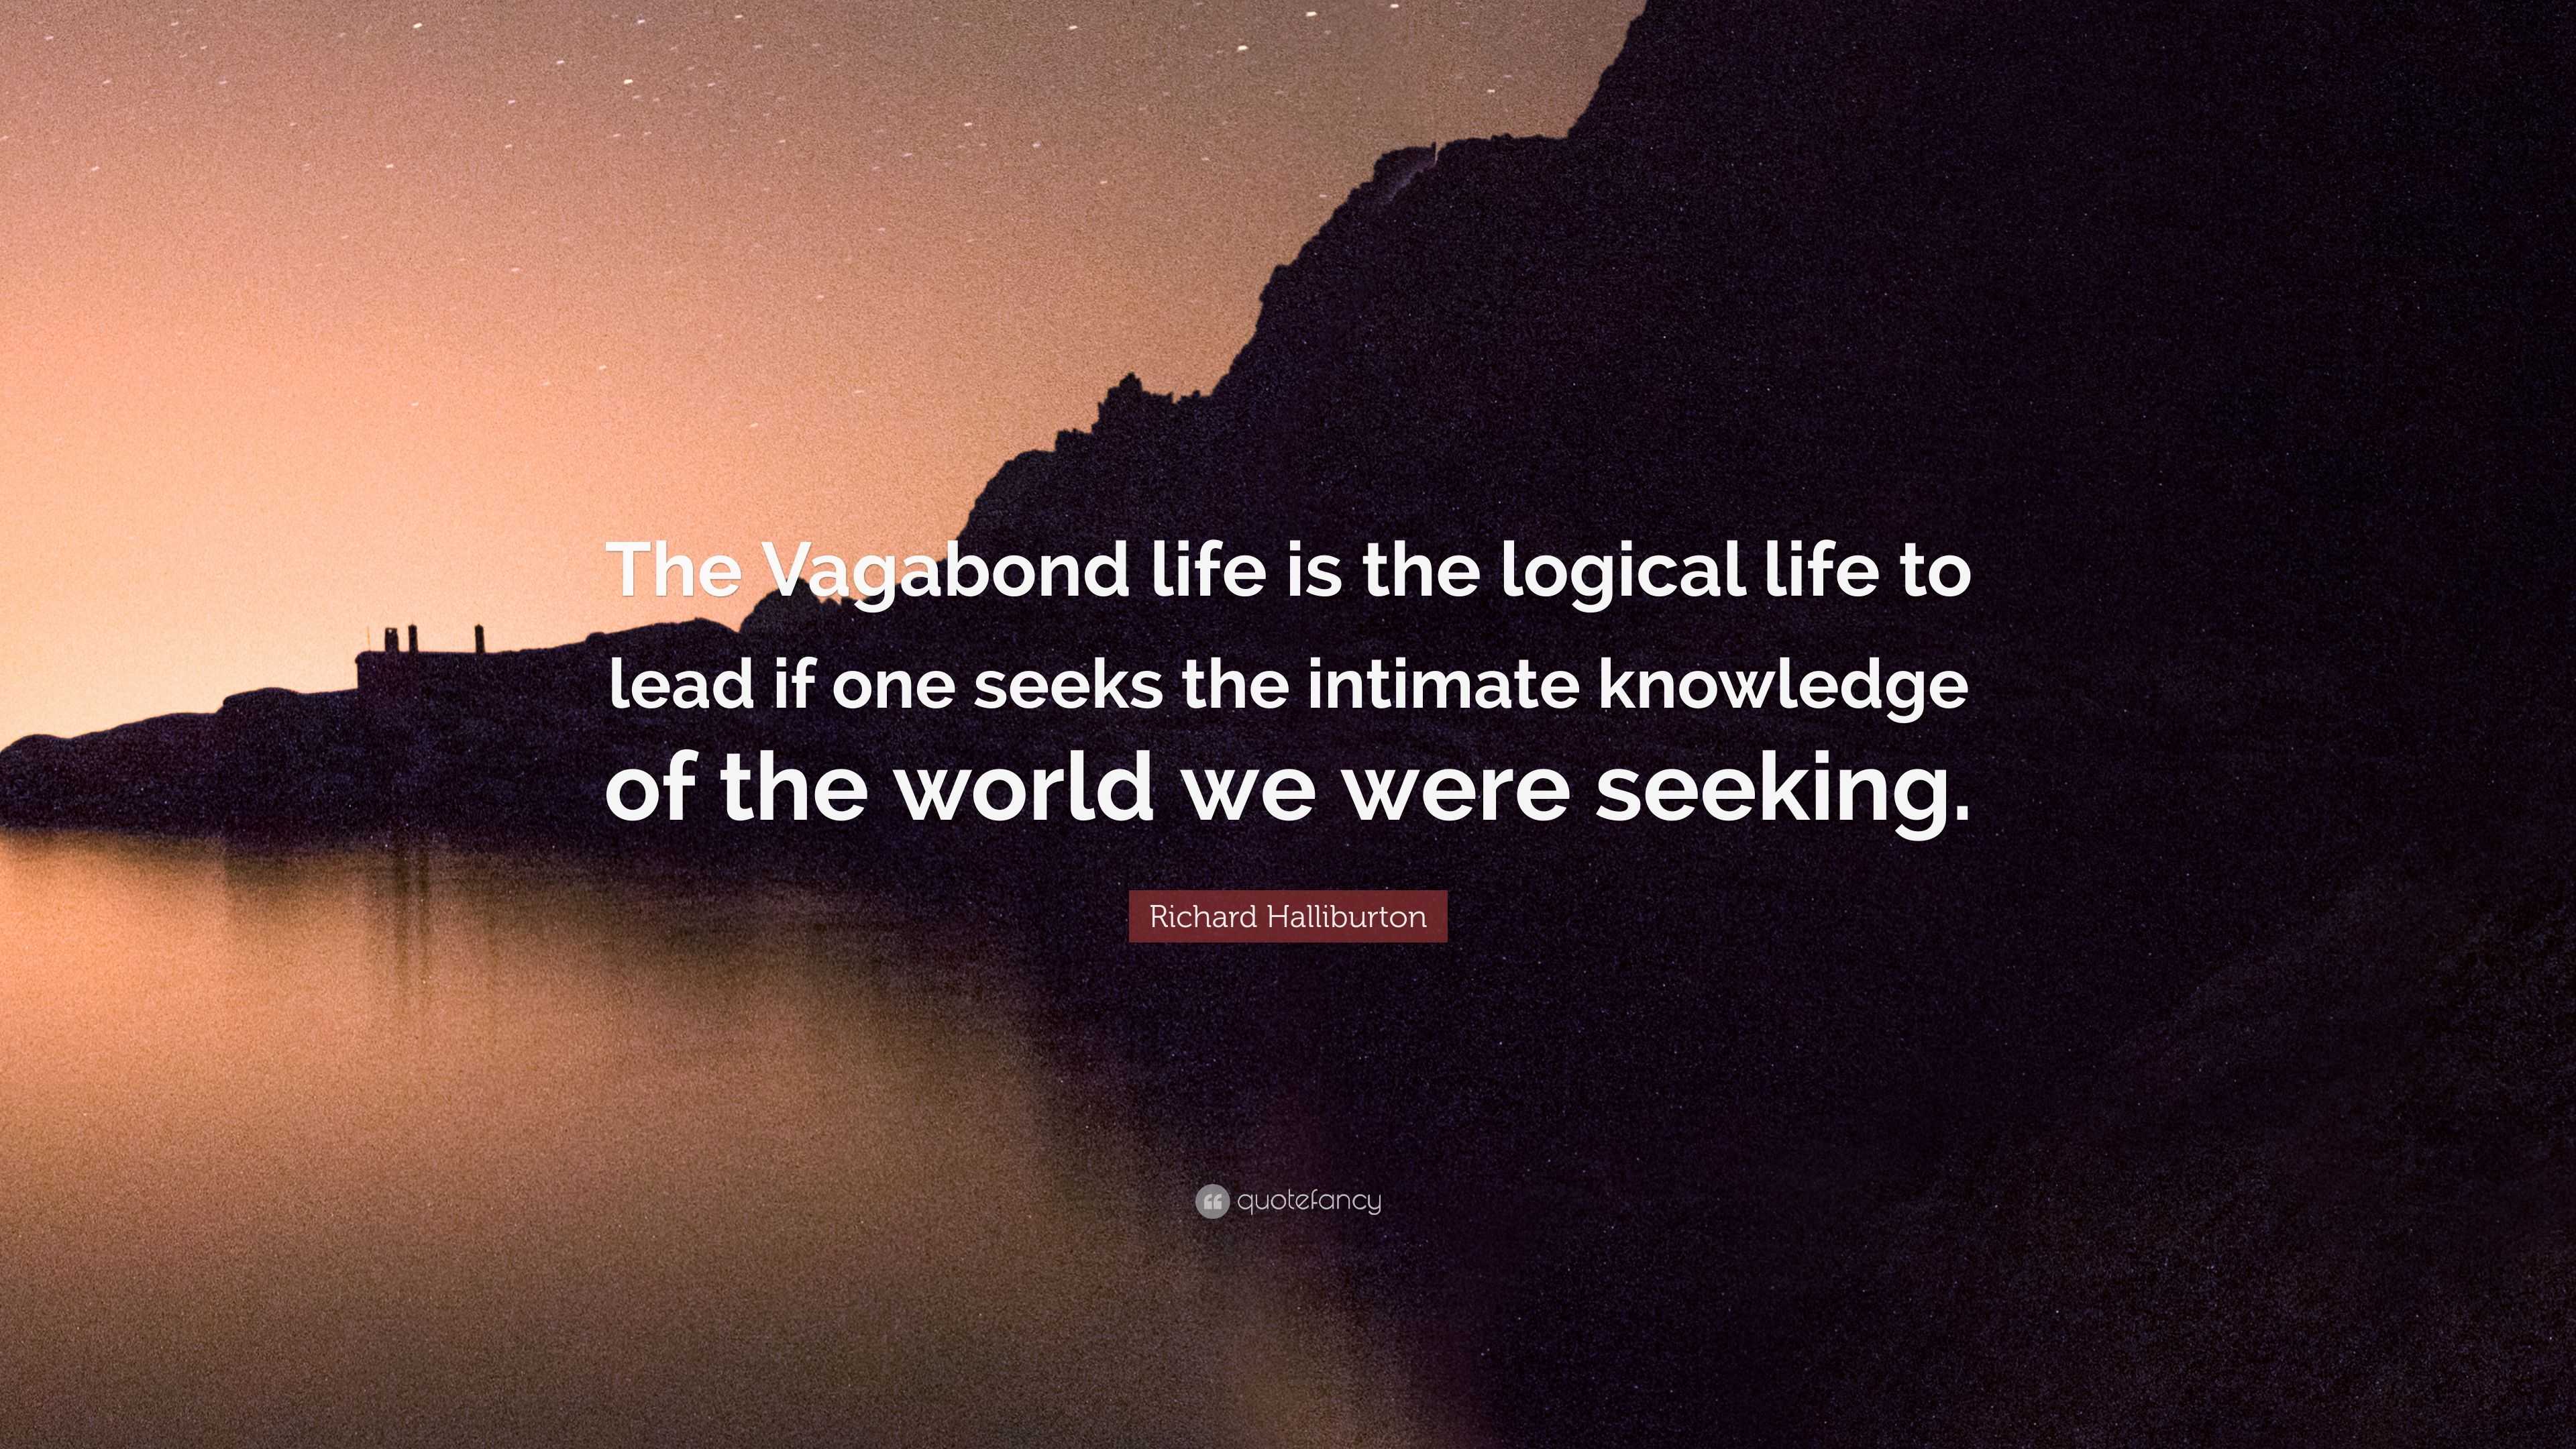 Richard Quote: “The Vagabond life the life to lead if seeks the